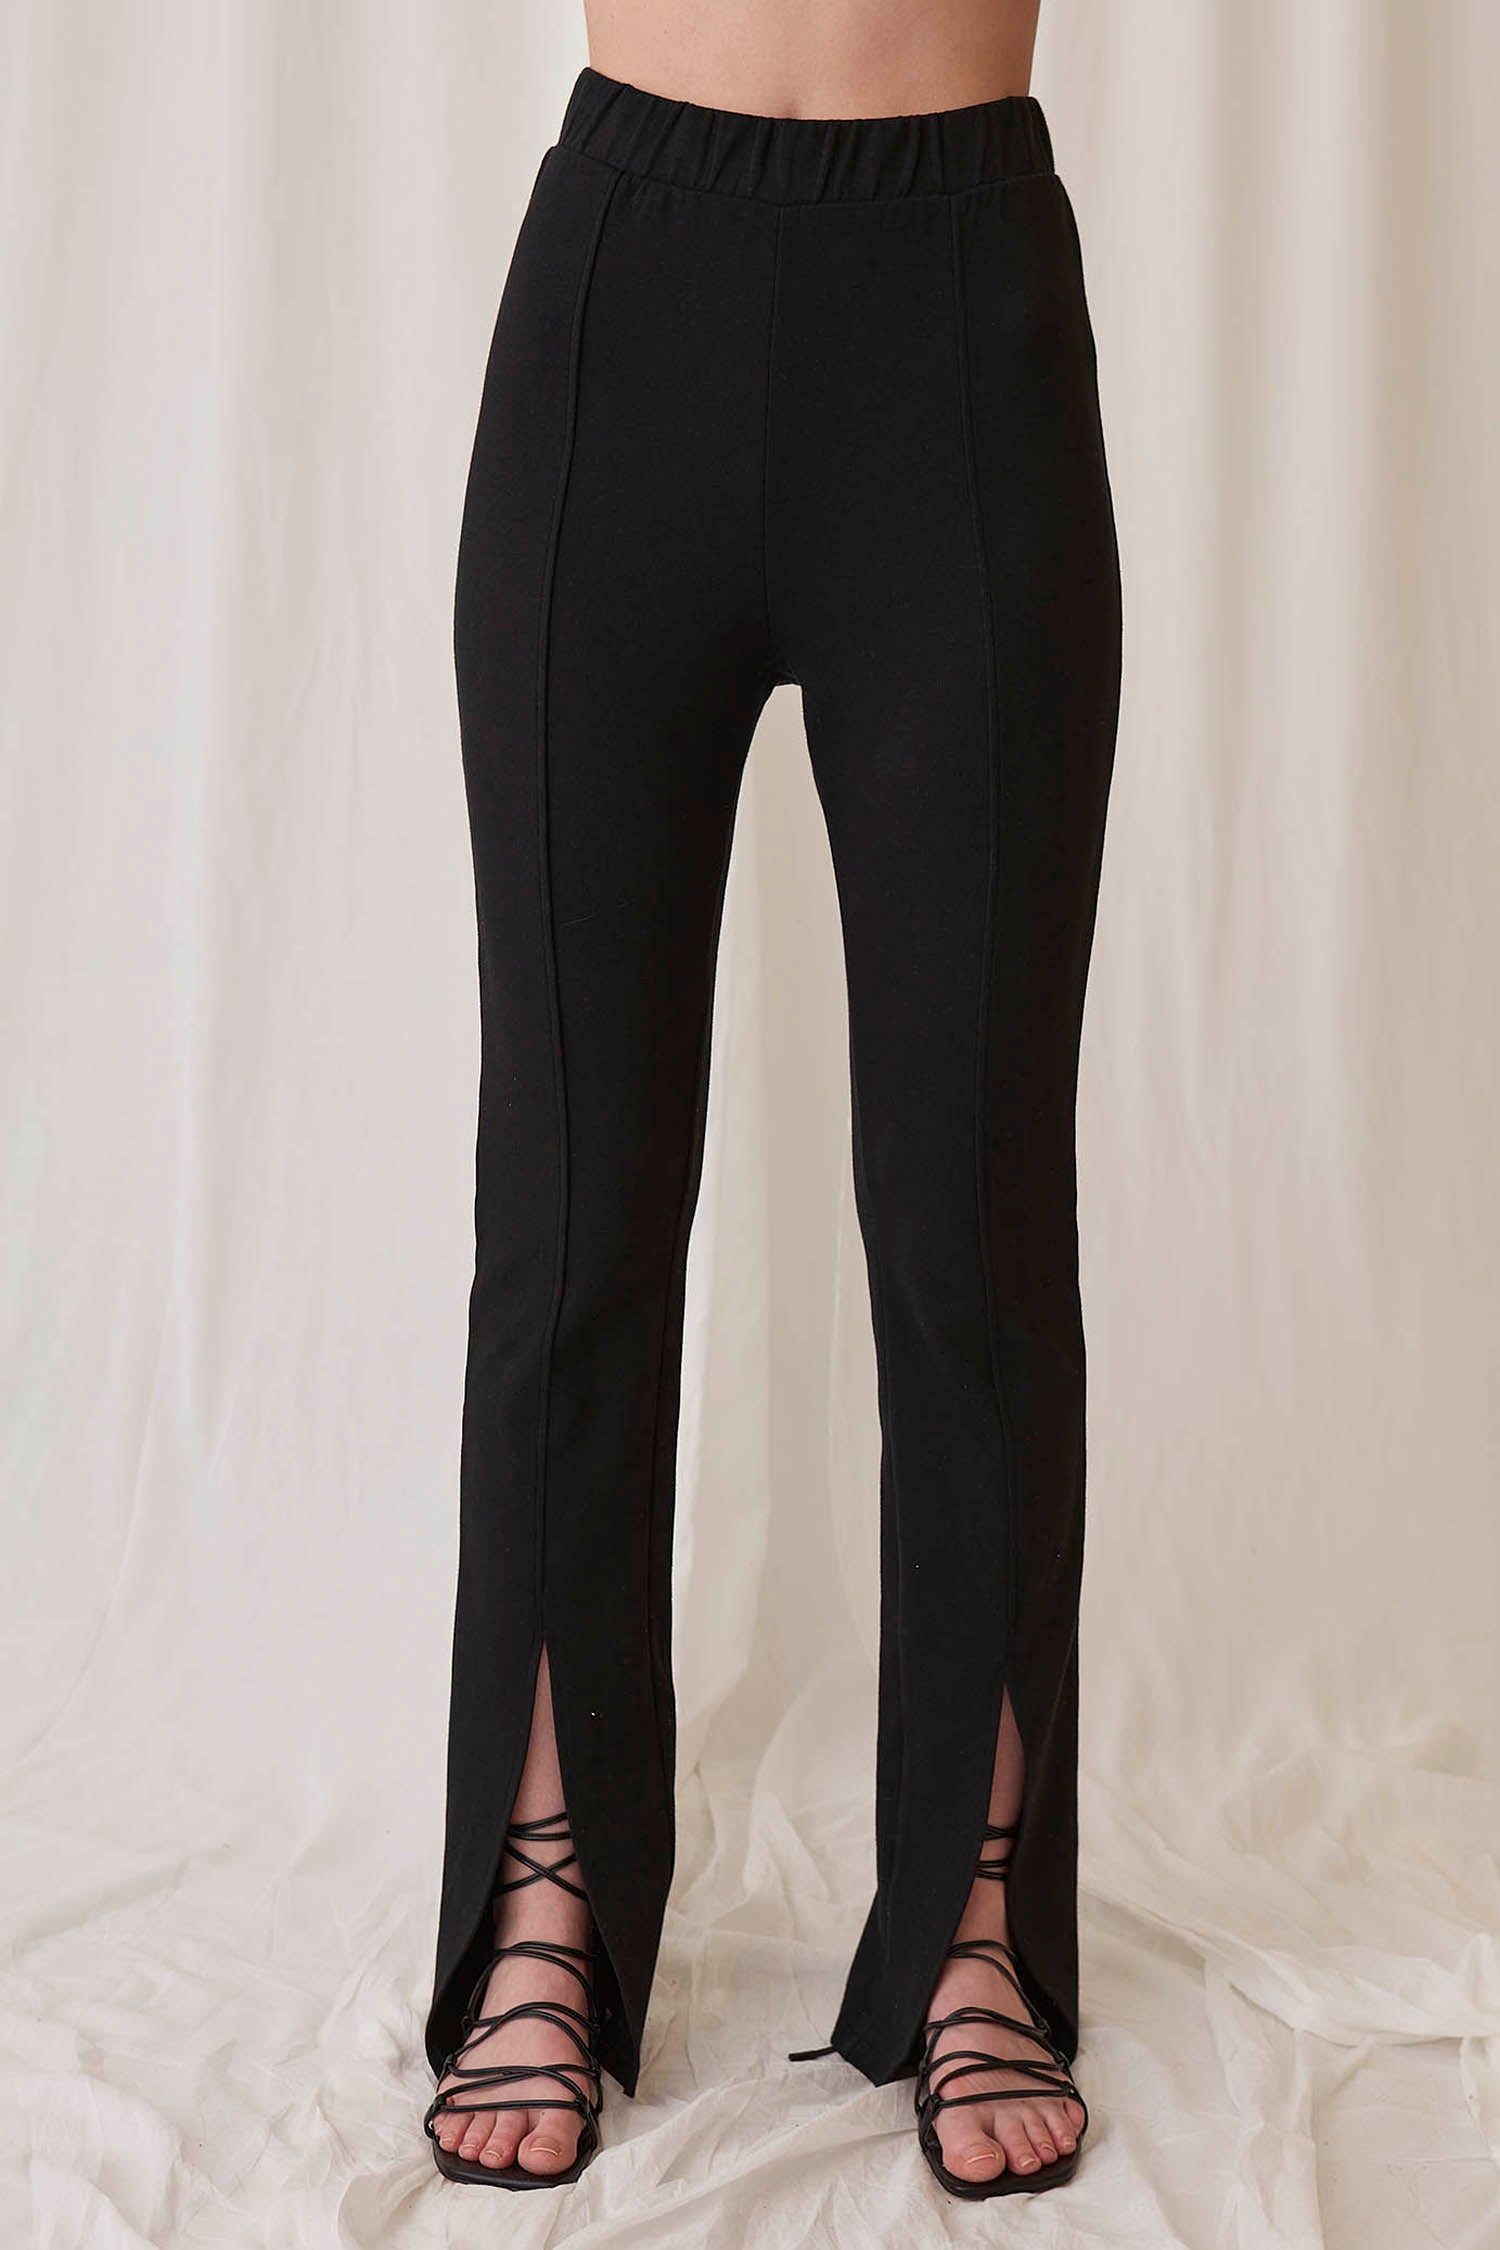 stretchy black pants for travel with front slit